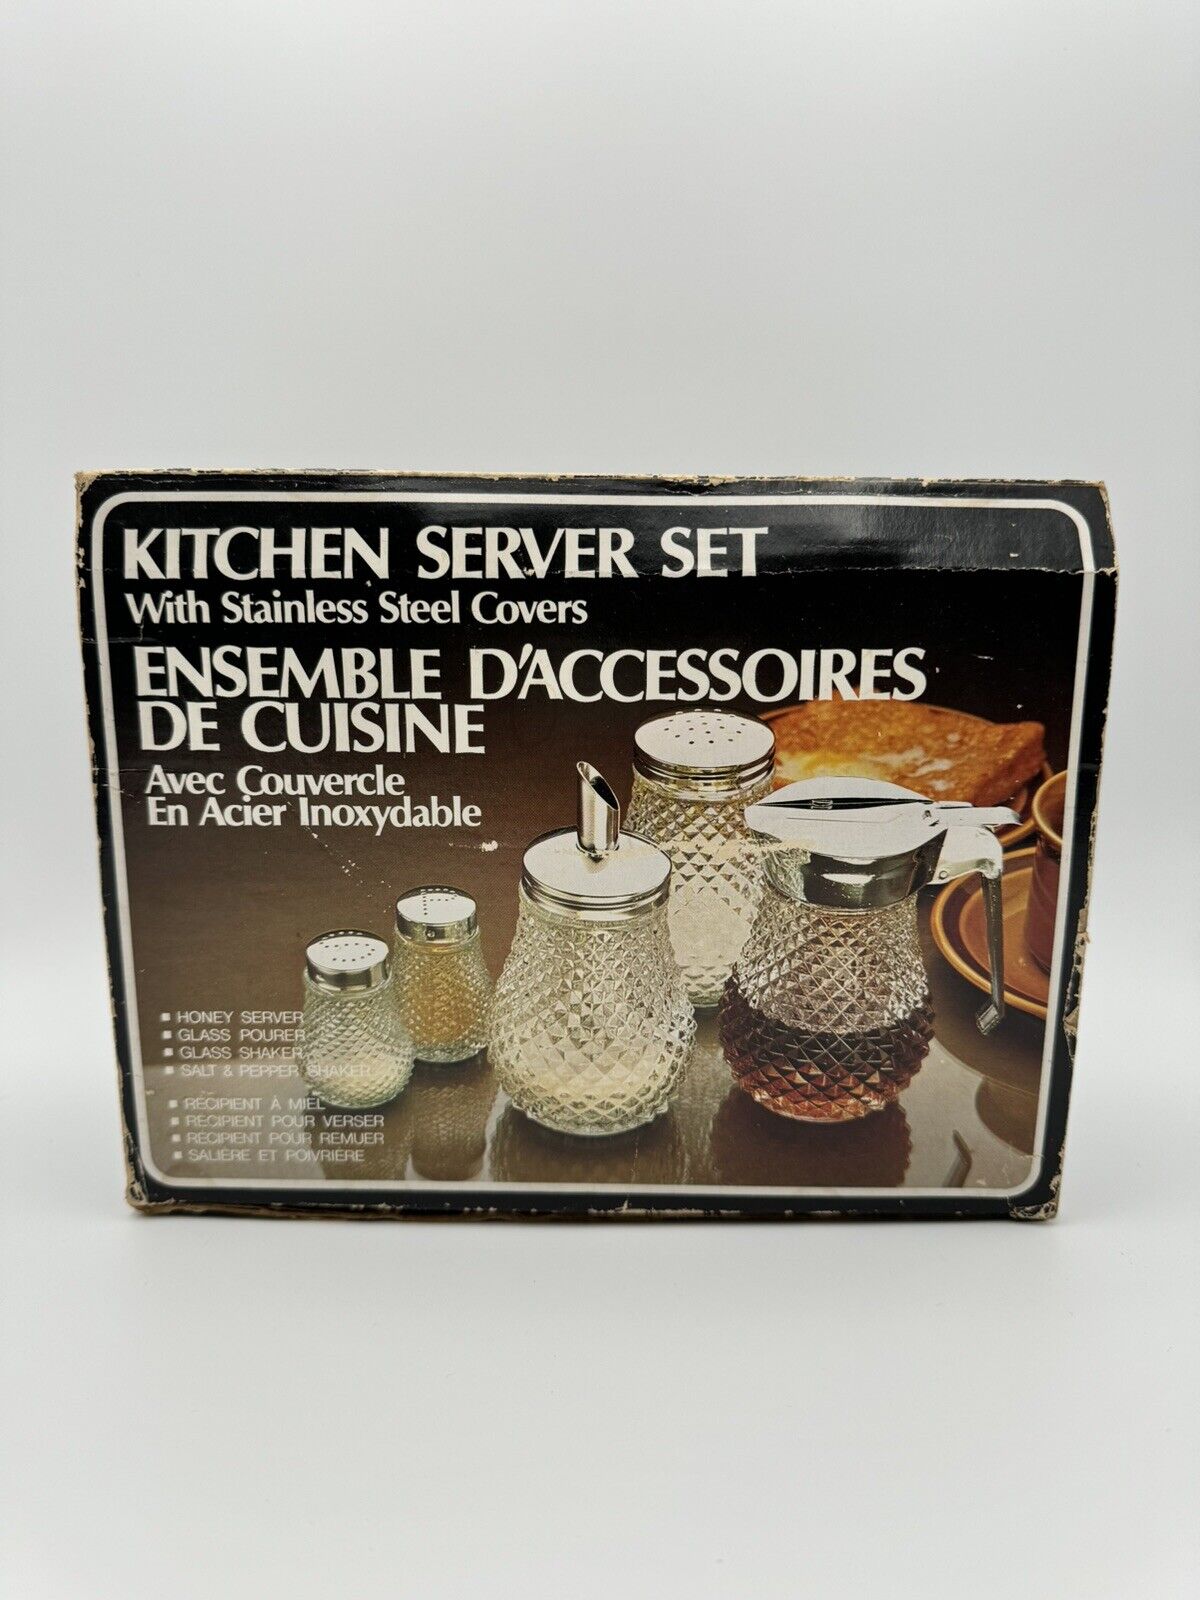 Vintage KITCHEN SERVER SET 3 Piece Diamond Glass with Stainless Steel Covers